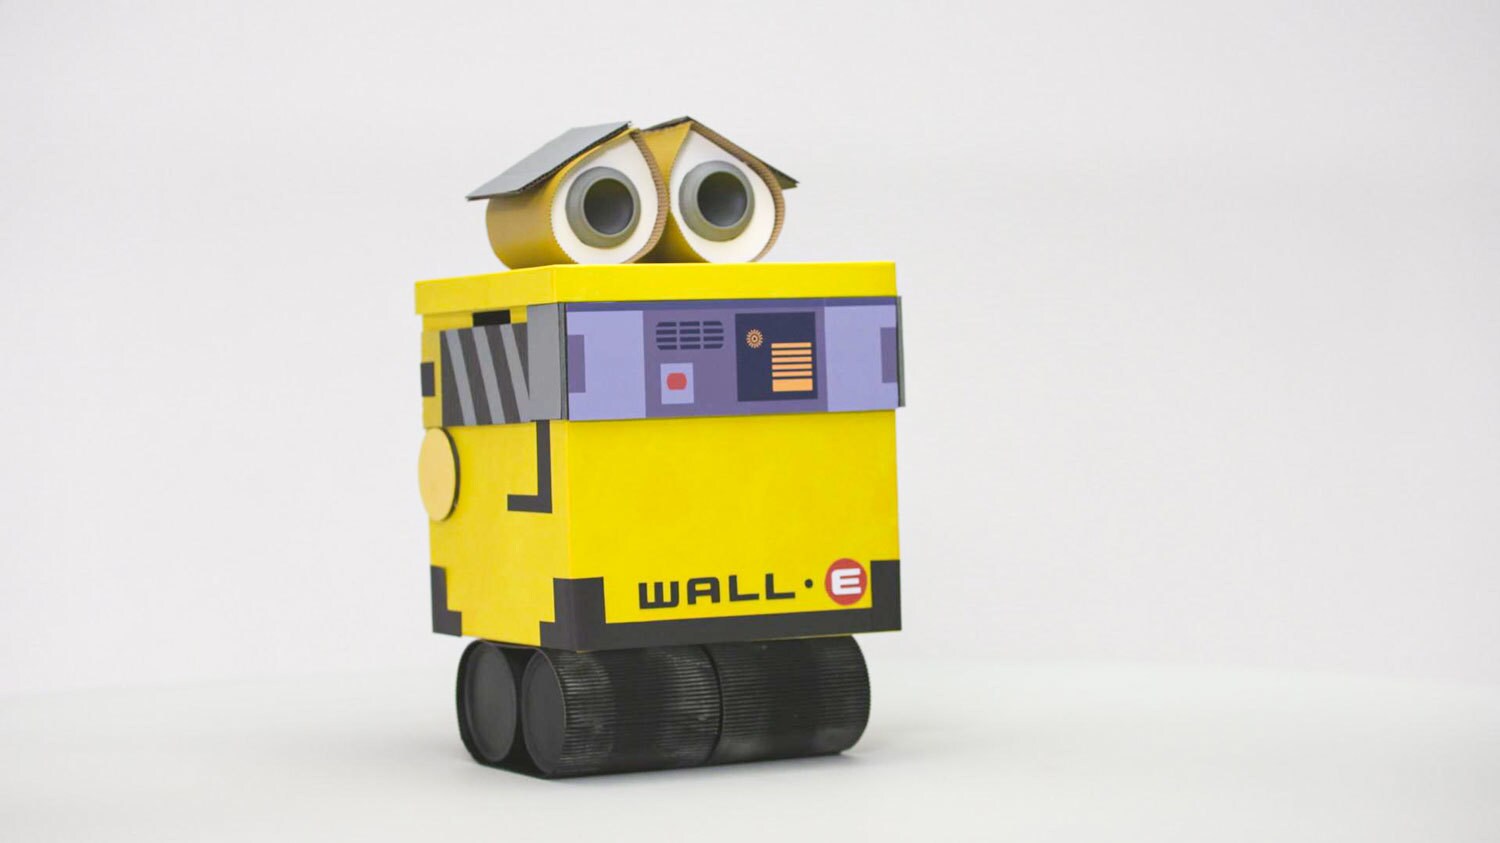 WALL•E: Recycling Container